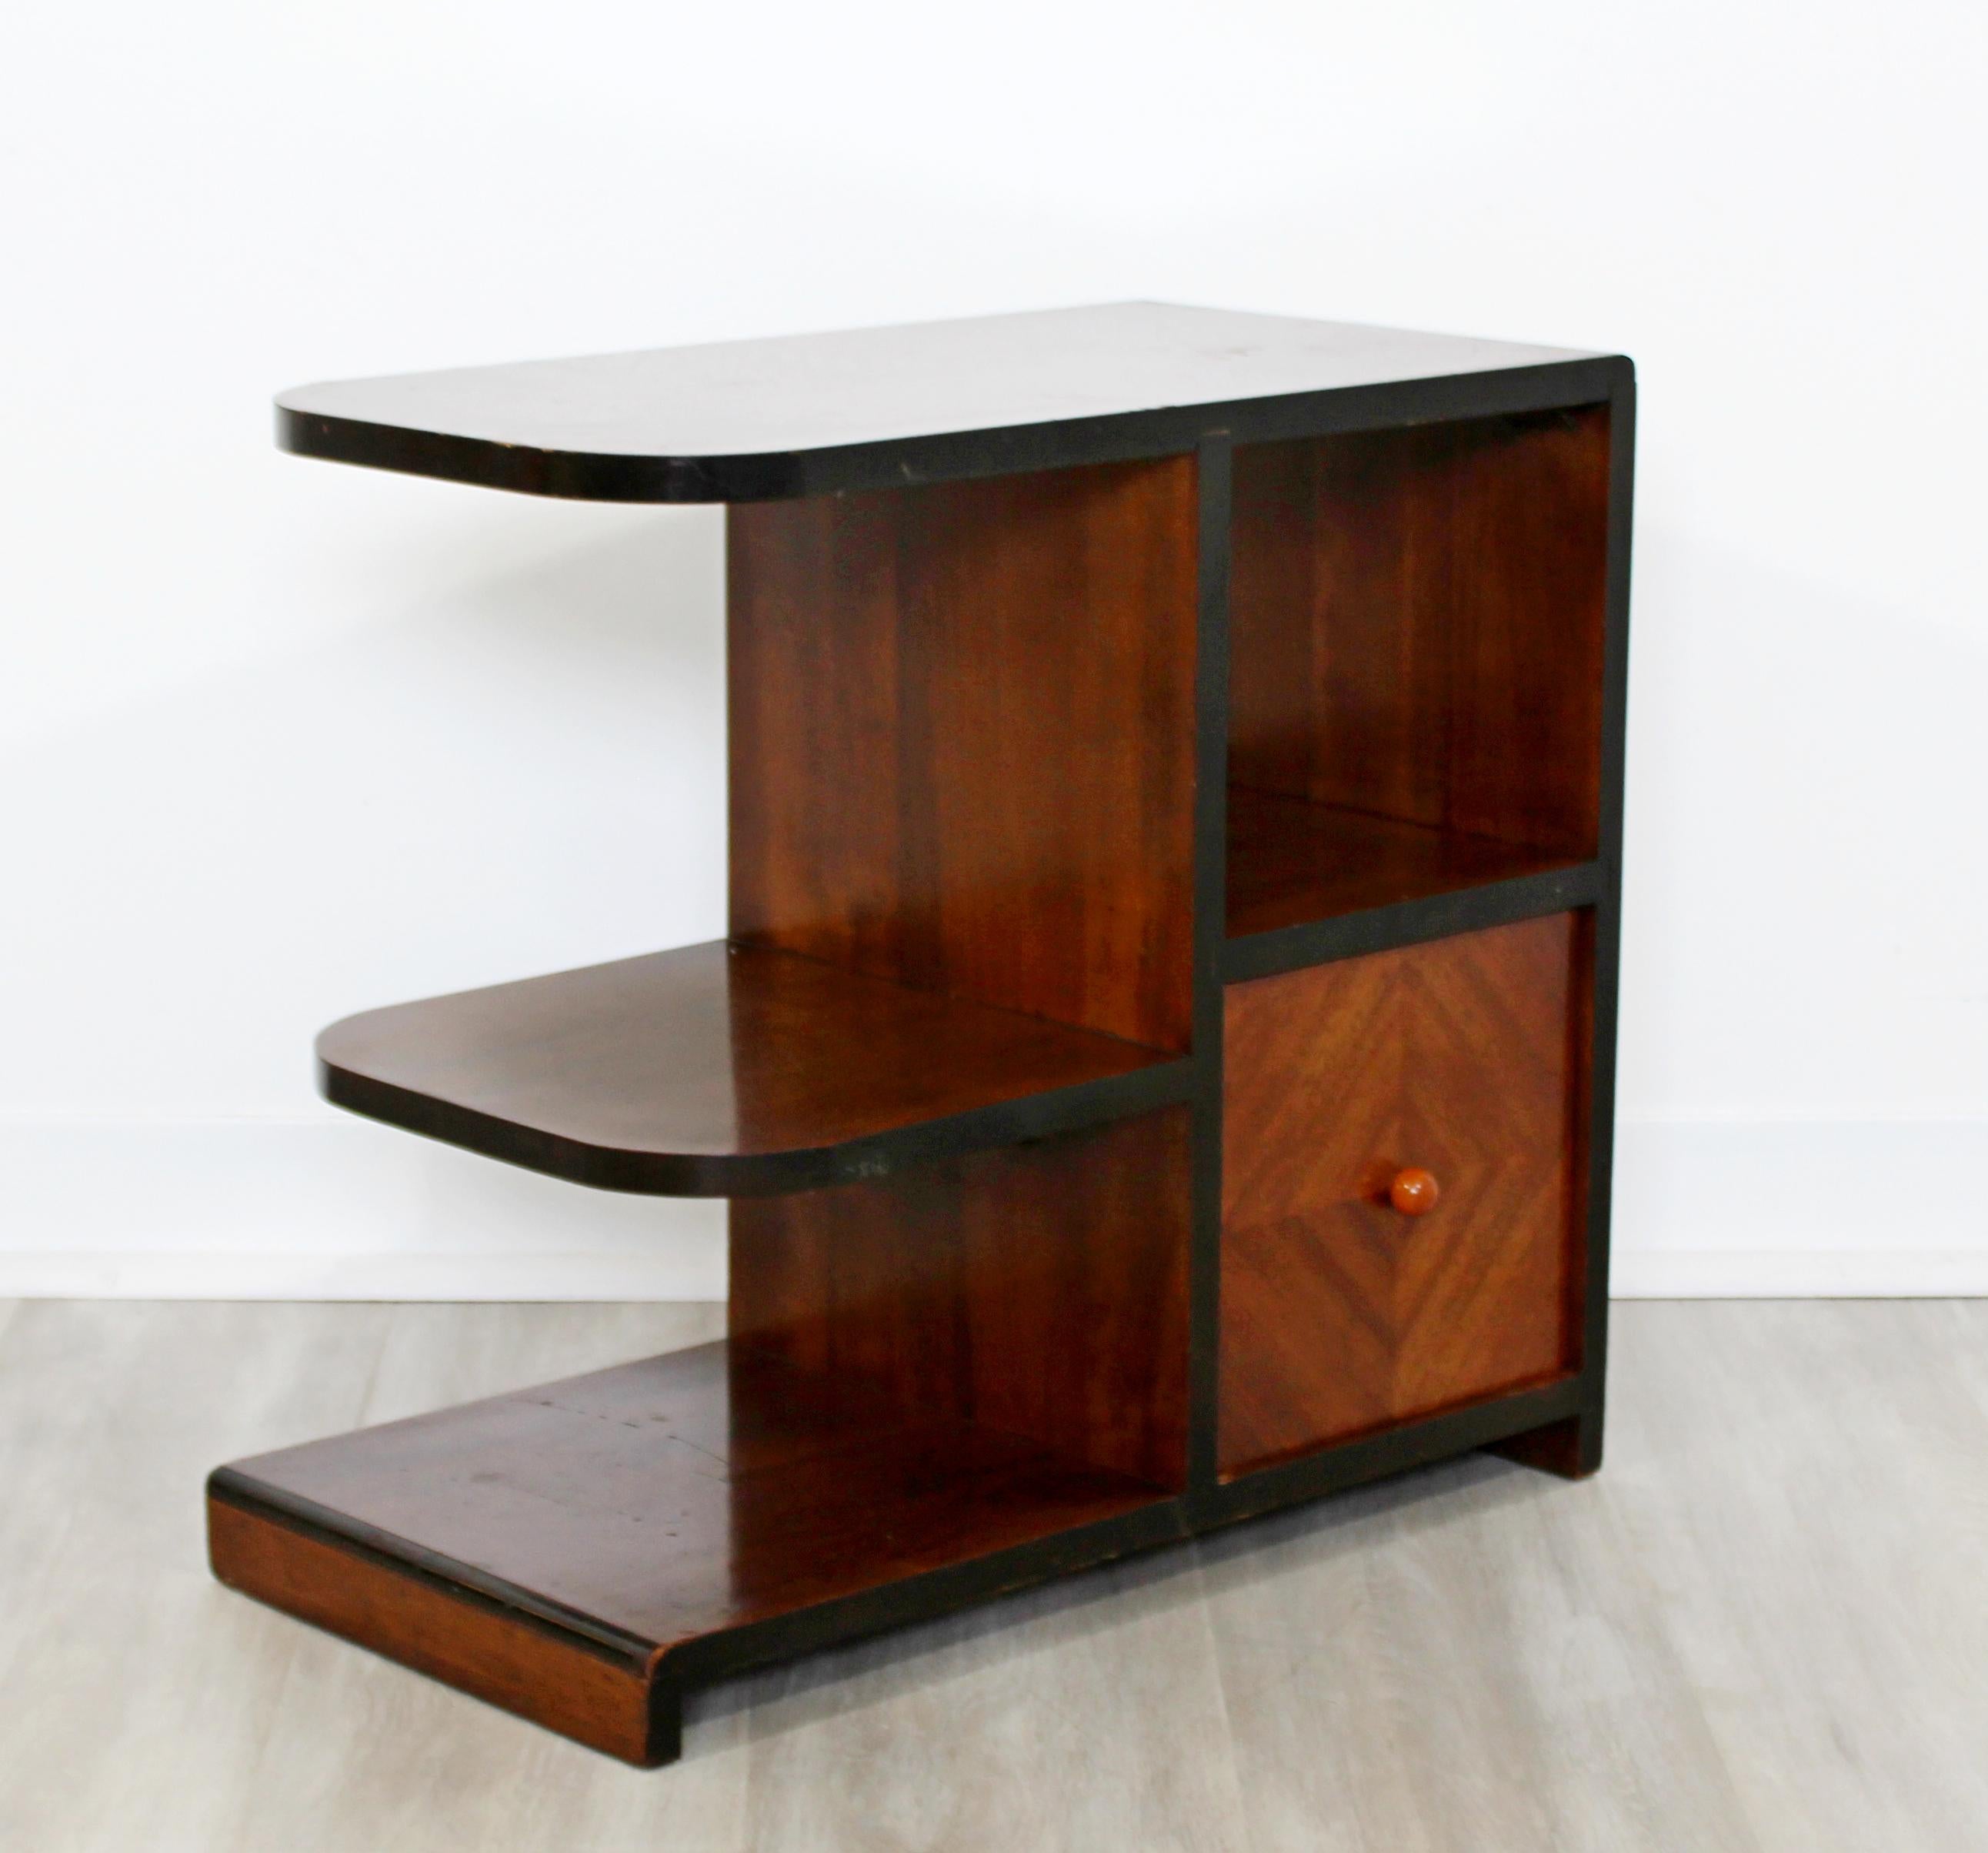 Mid-20th Century Art Deco 3 Tiered Side End Table Nightstand Shelves Desky Rohde Frankl Era